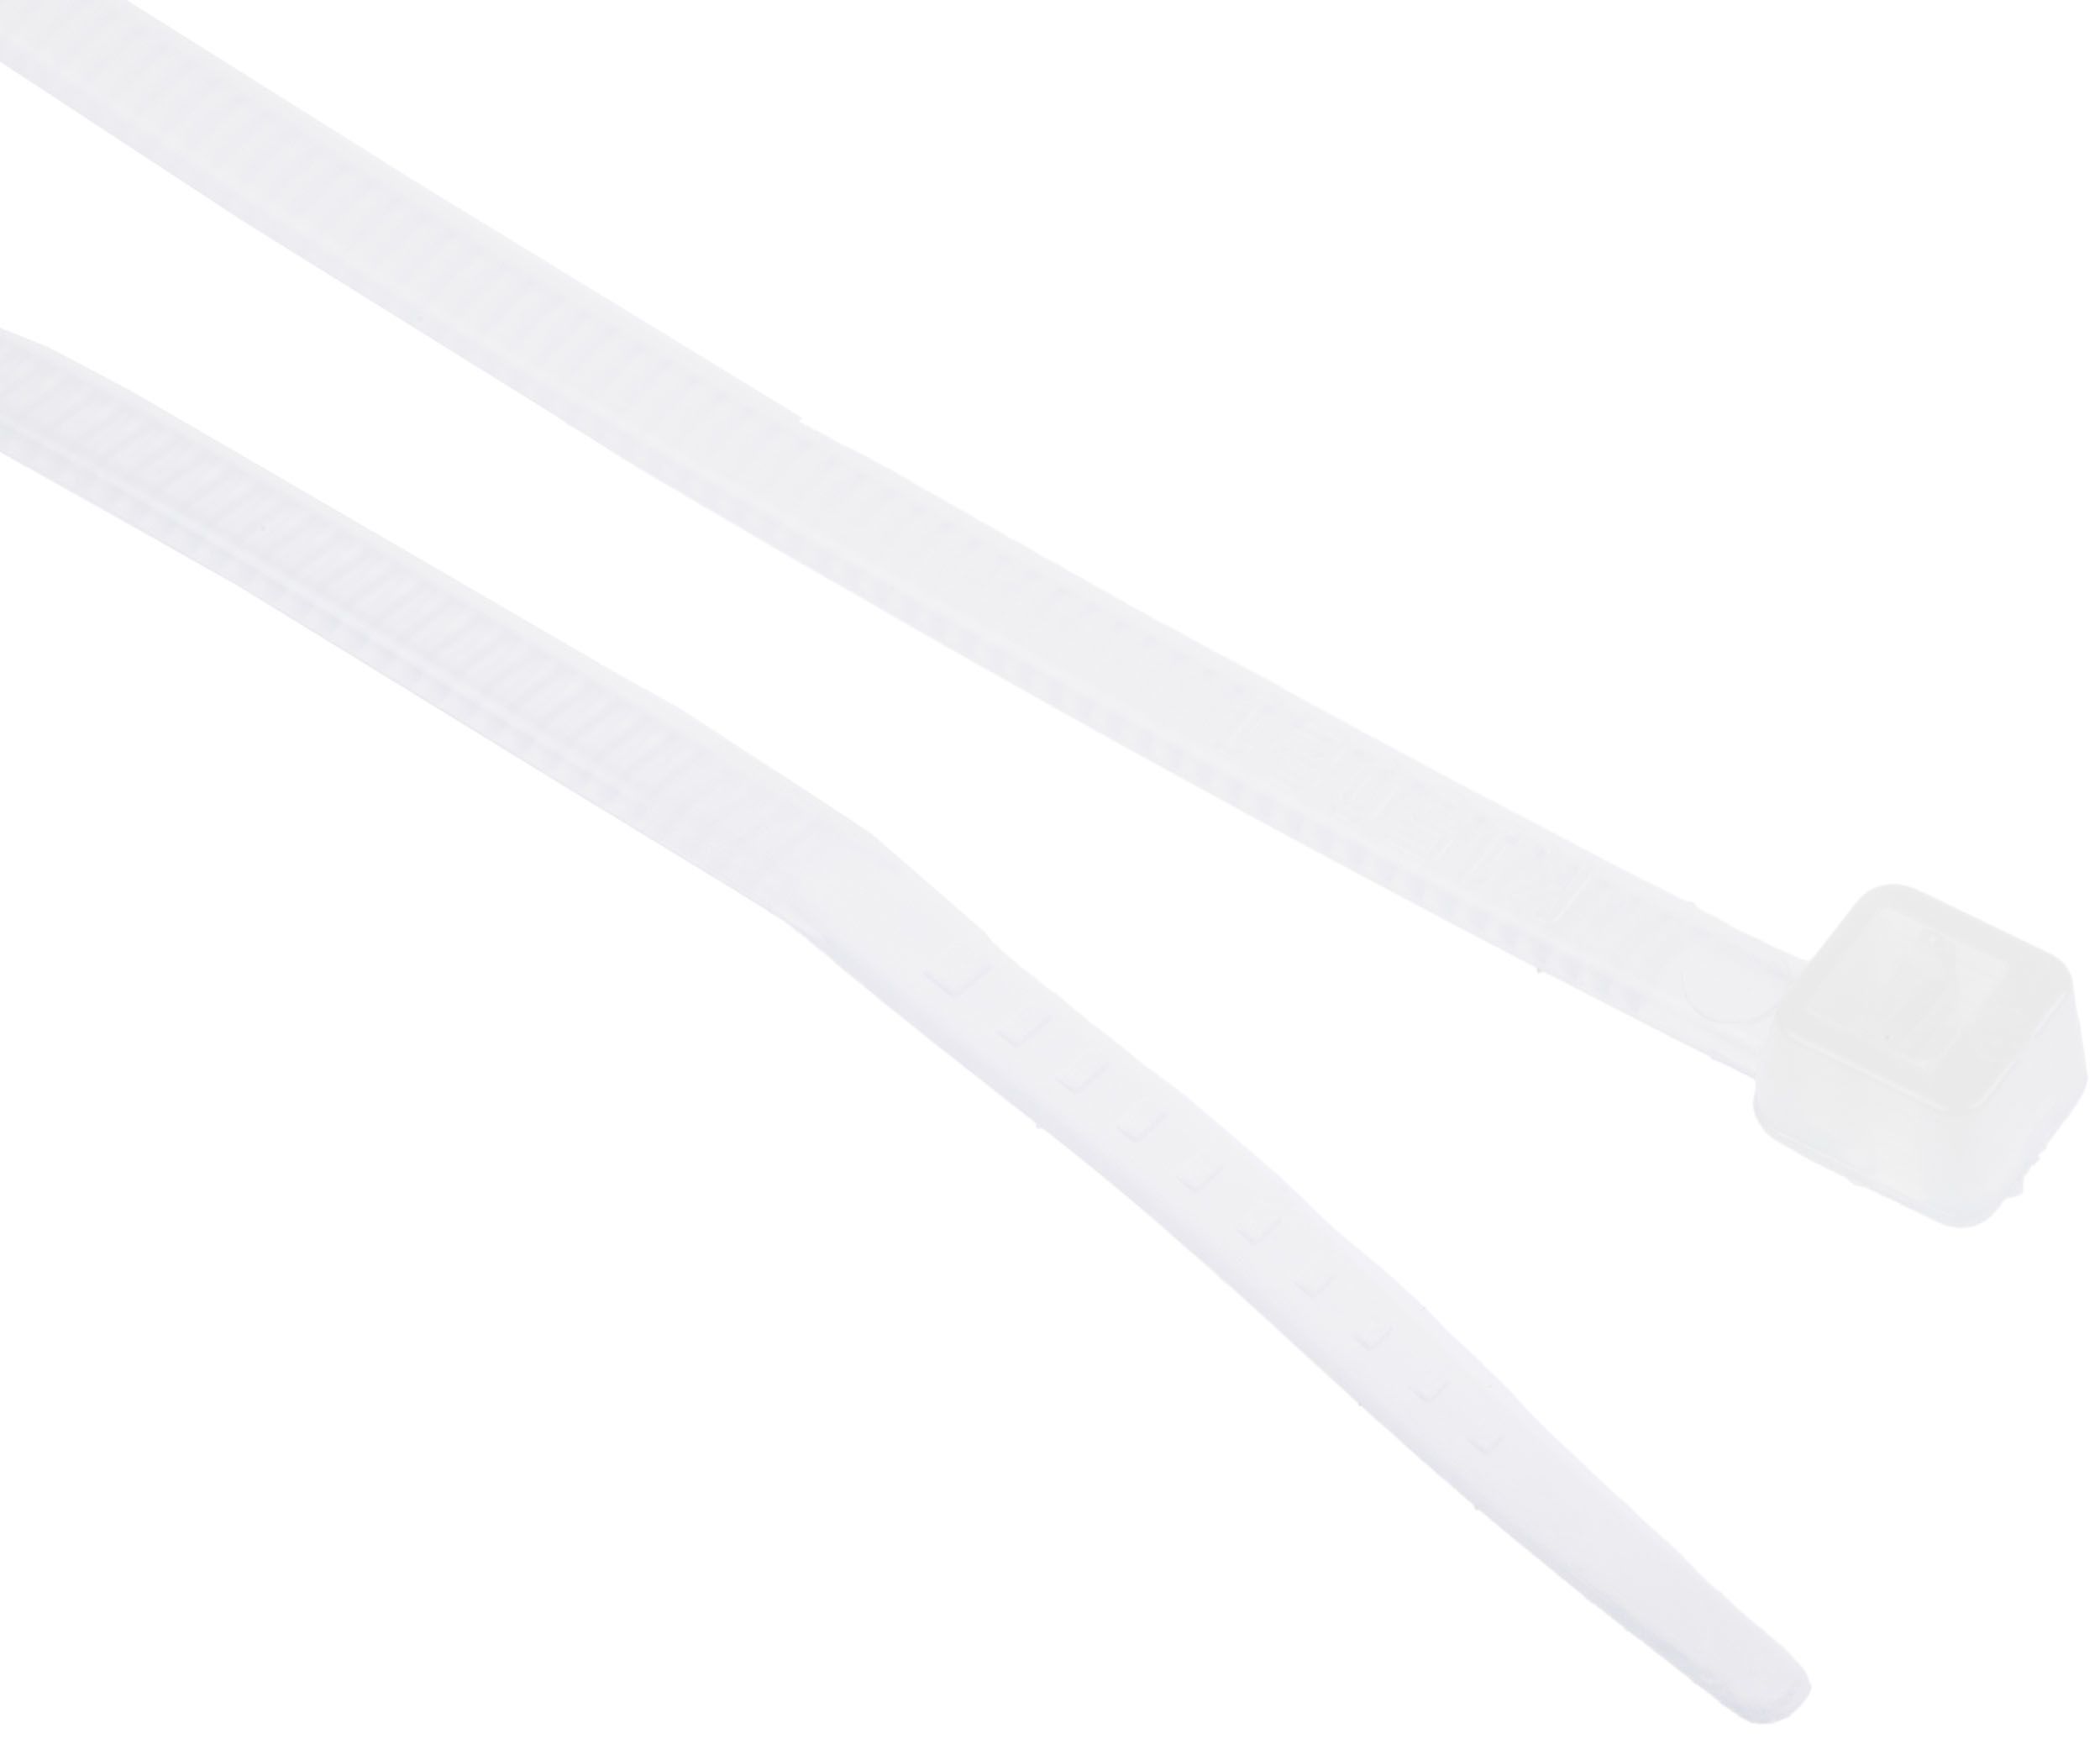 RS PRO Cable Tie, 100mm x 2.5 mm, Natural Nylon, Pk-100